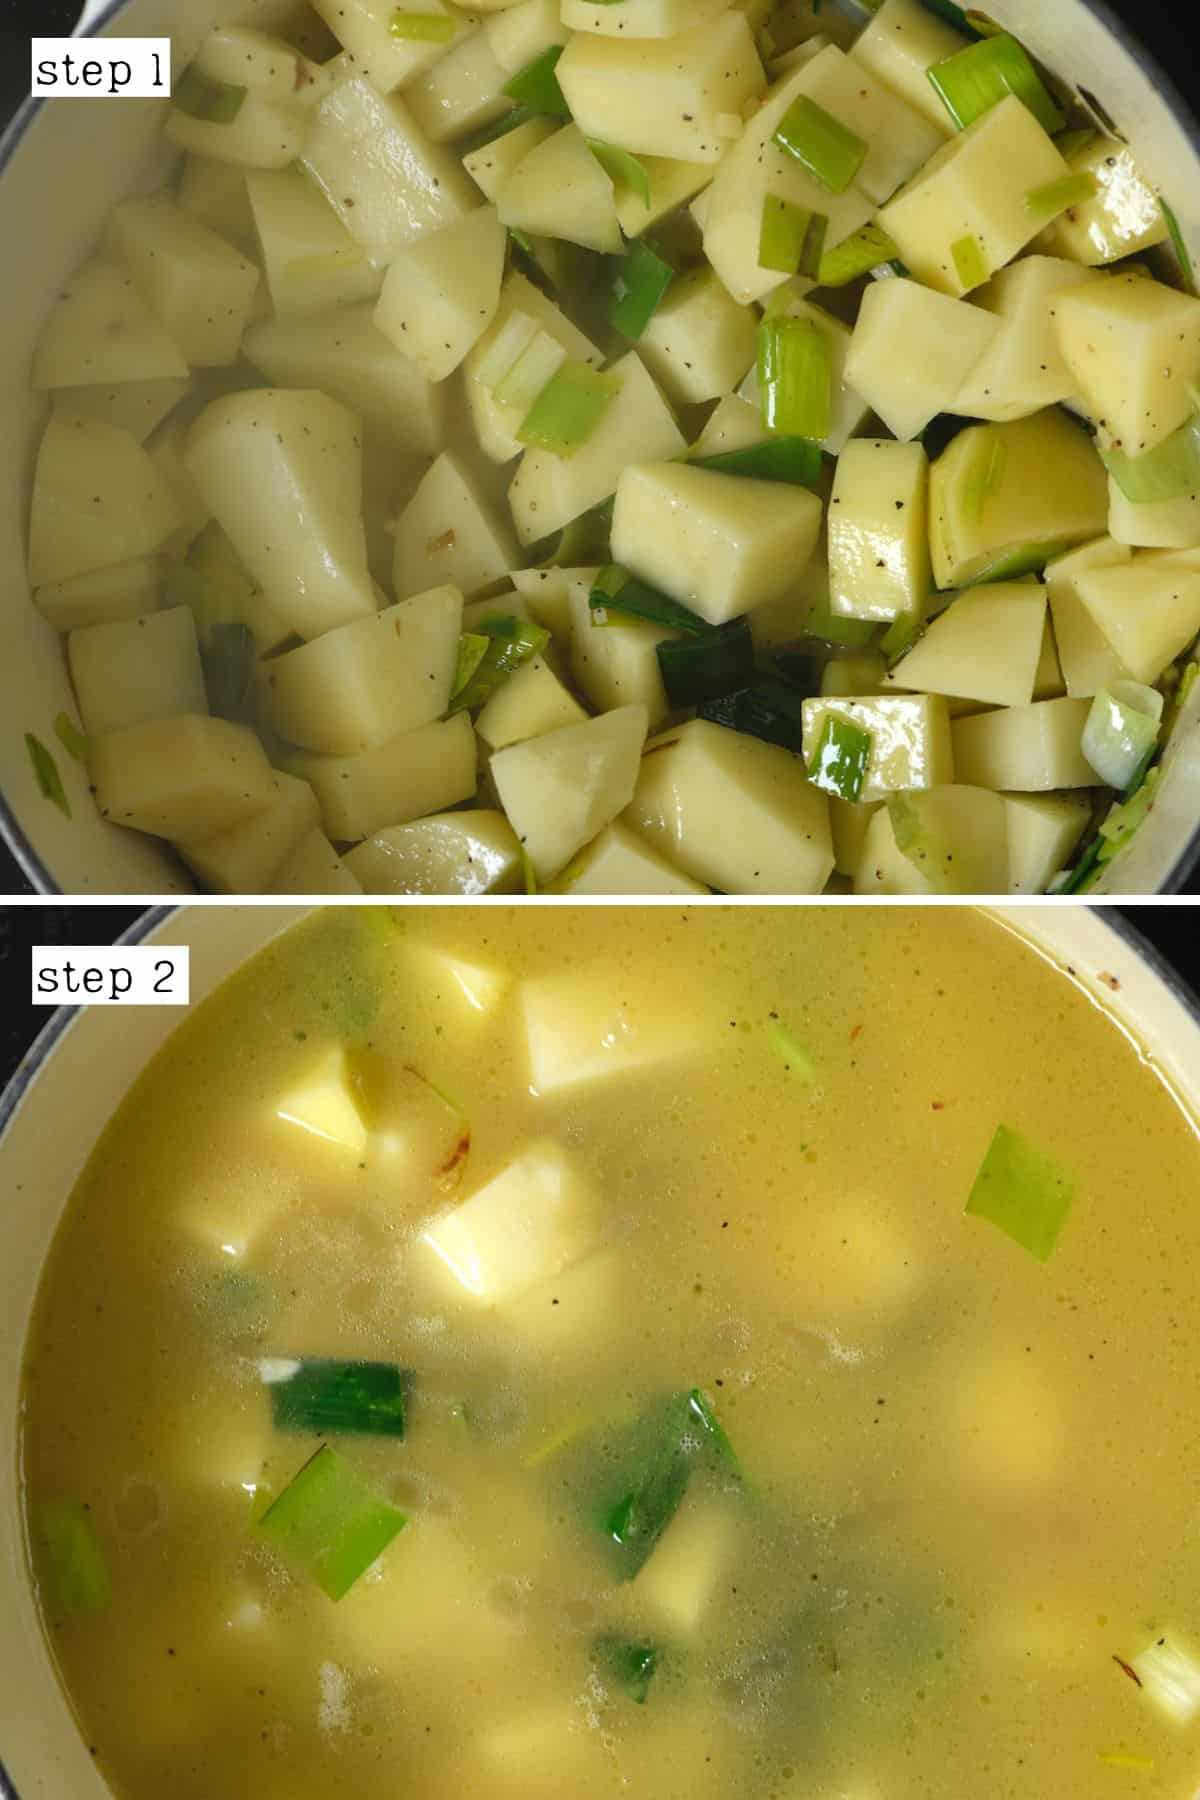 Steps for cooking potatoes and leek for soup